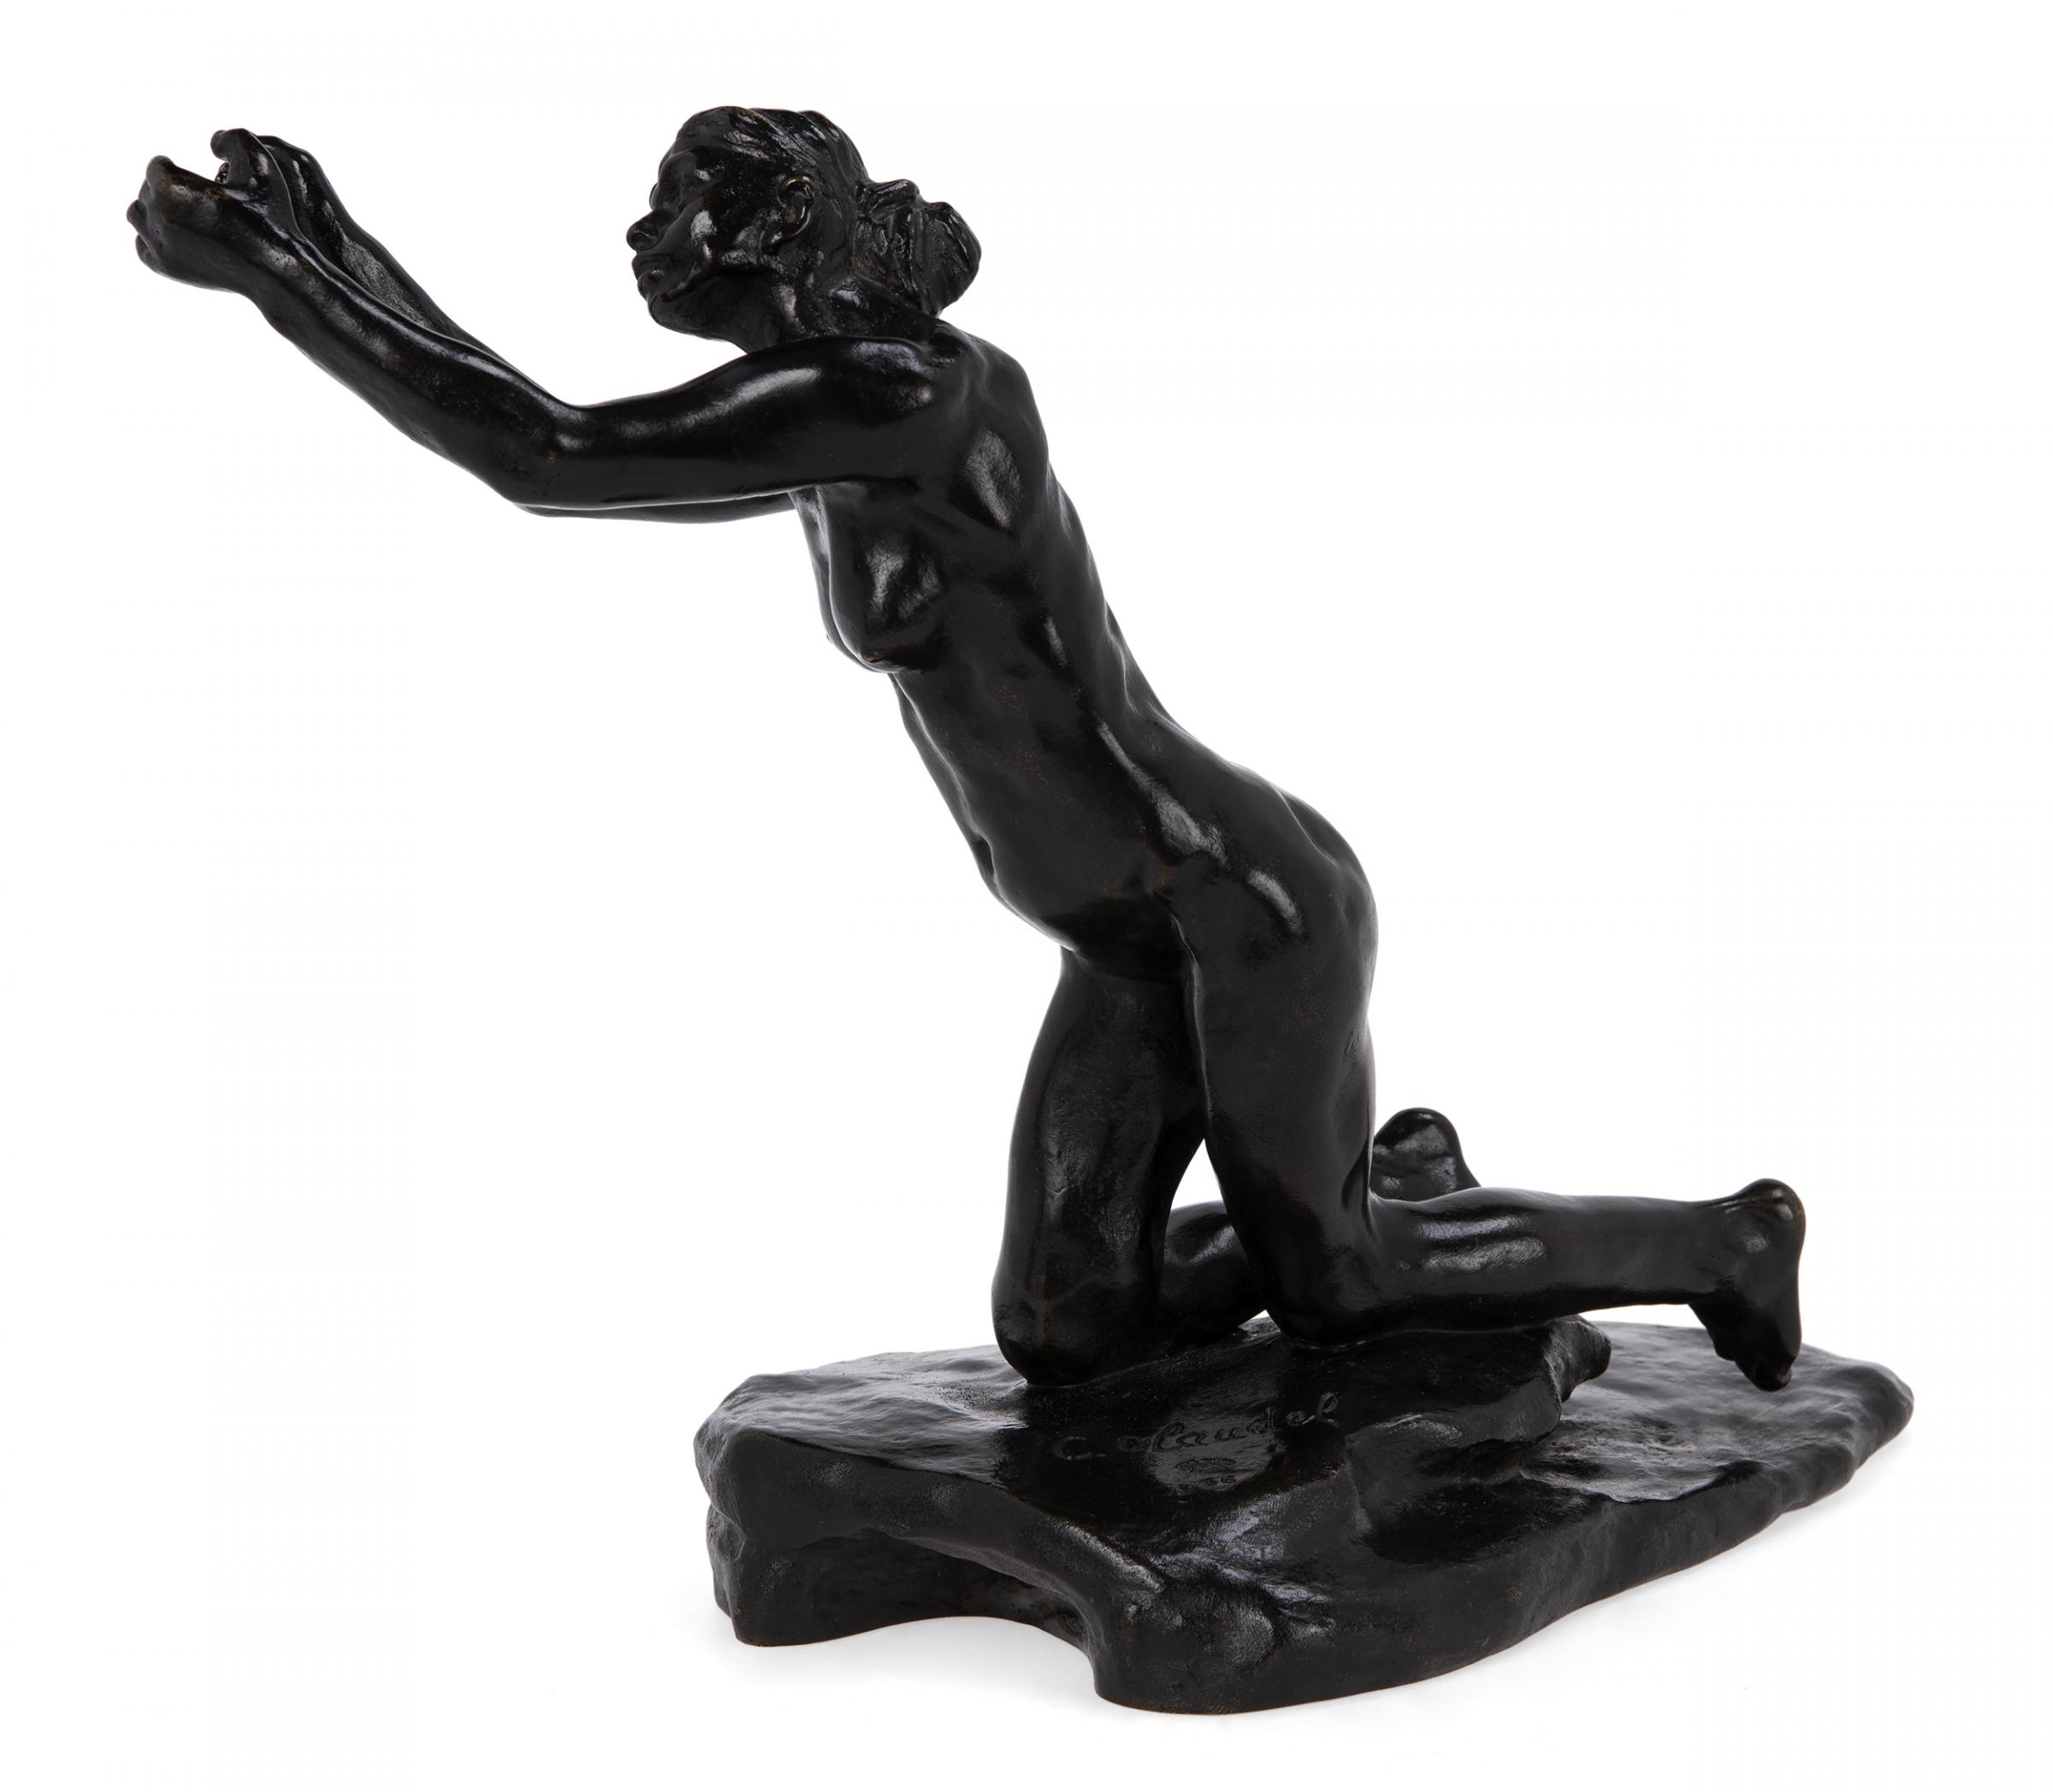 The Burrell Collection’s acquisition of a sculpture by Camille Claudel, L’Implorante.